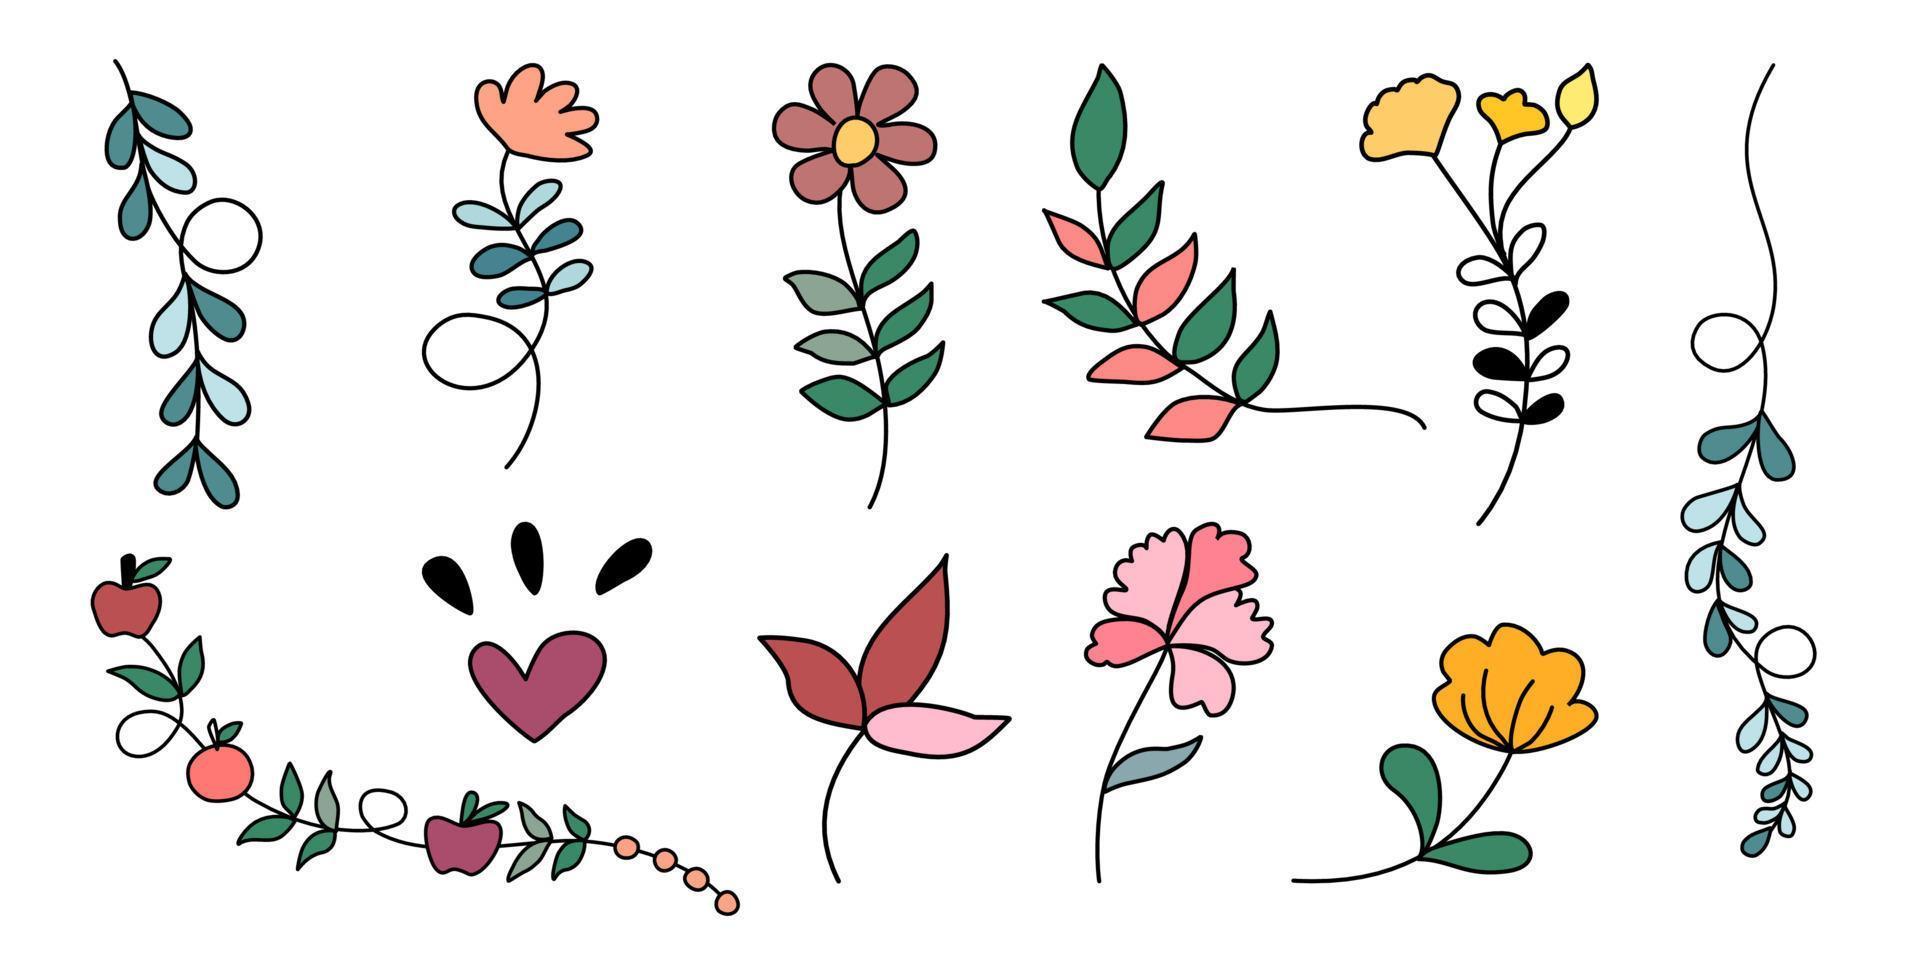 Vector set floral and leaf elements designed in doodle style for decorations, cards, digital prints, paper patterns, apparel patterns, stickers, pillows, spring themed decorations etc.